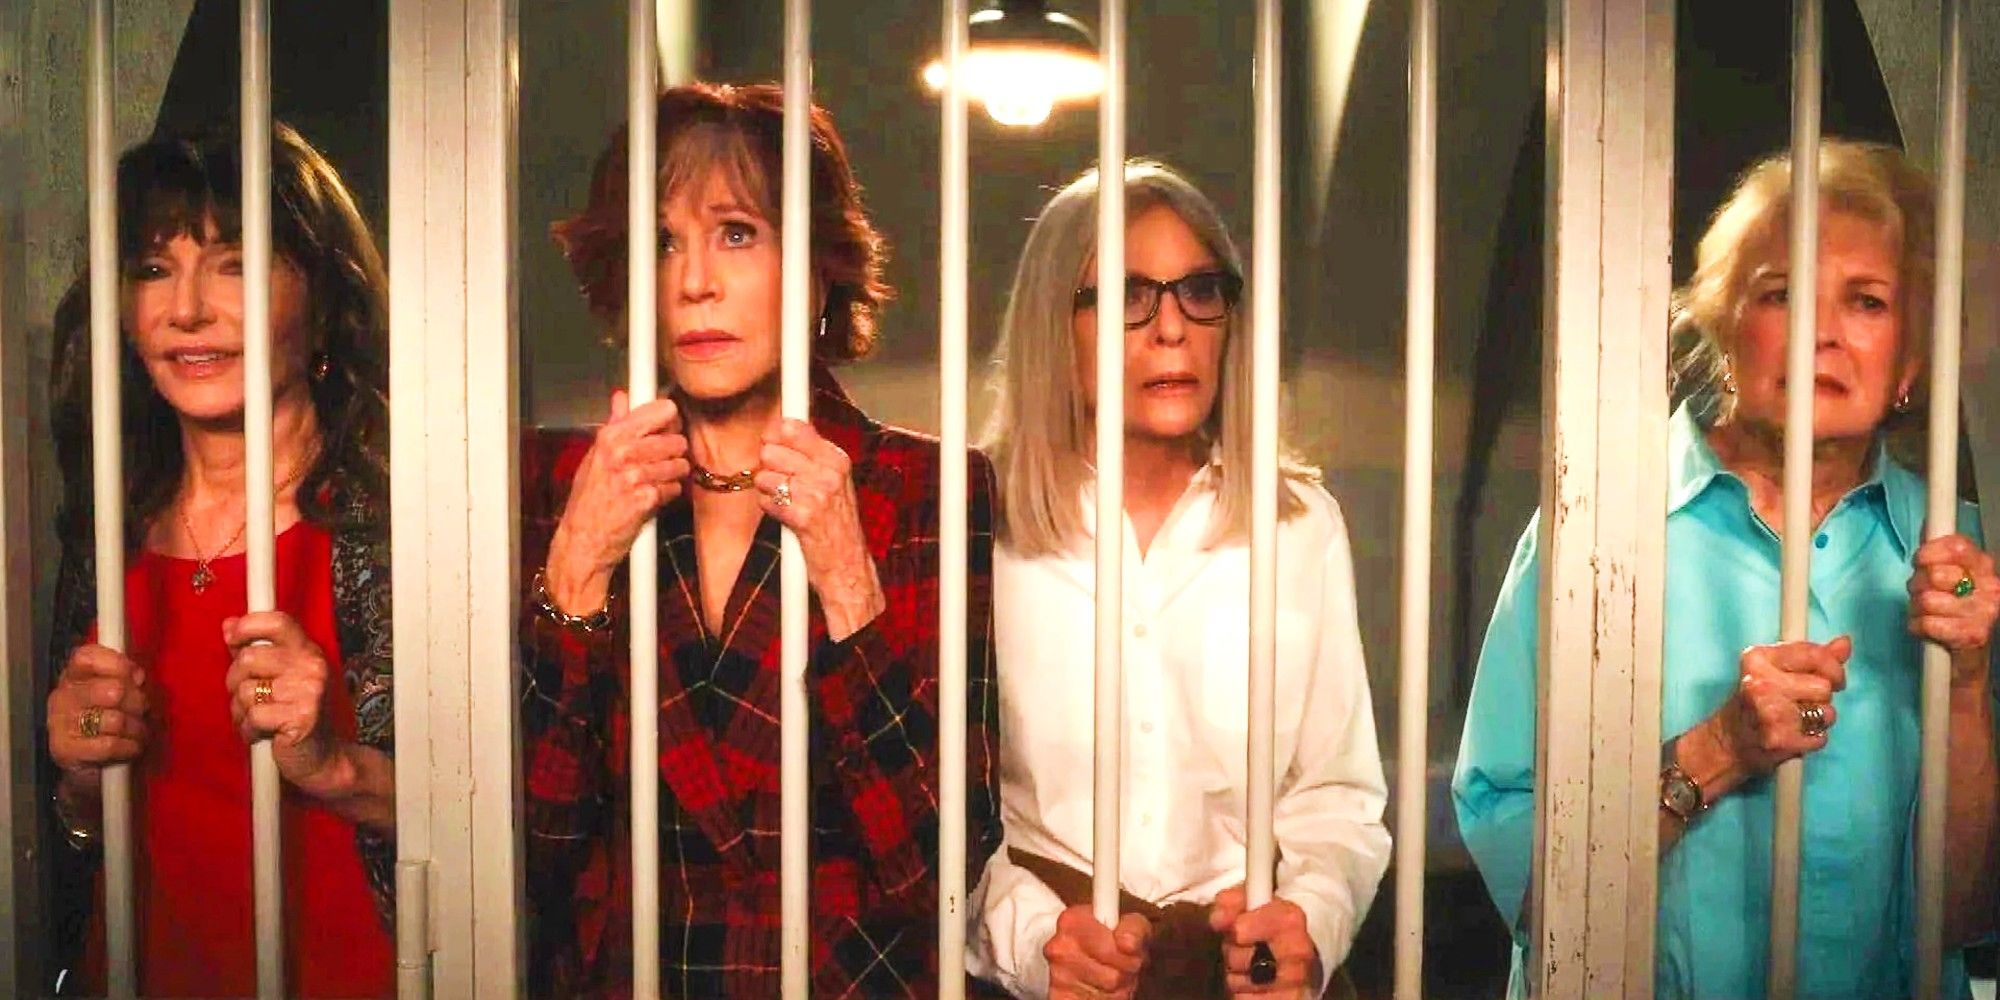 Carol Vivian Diane and Sharon in jail in Book Club: The Next Chapter